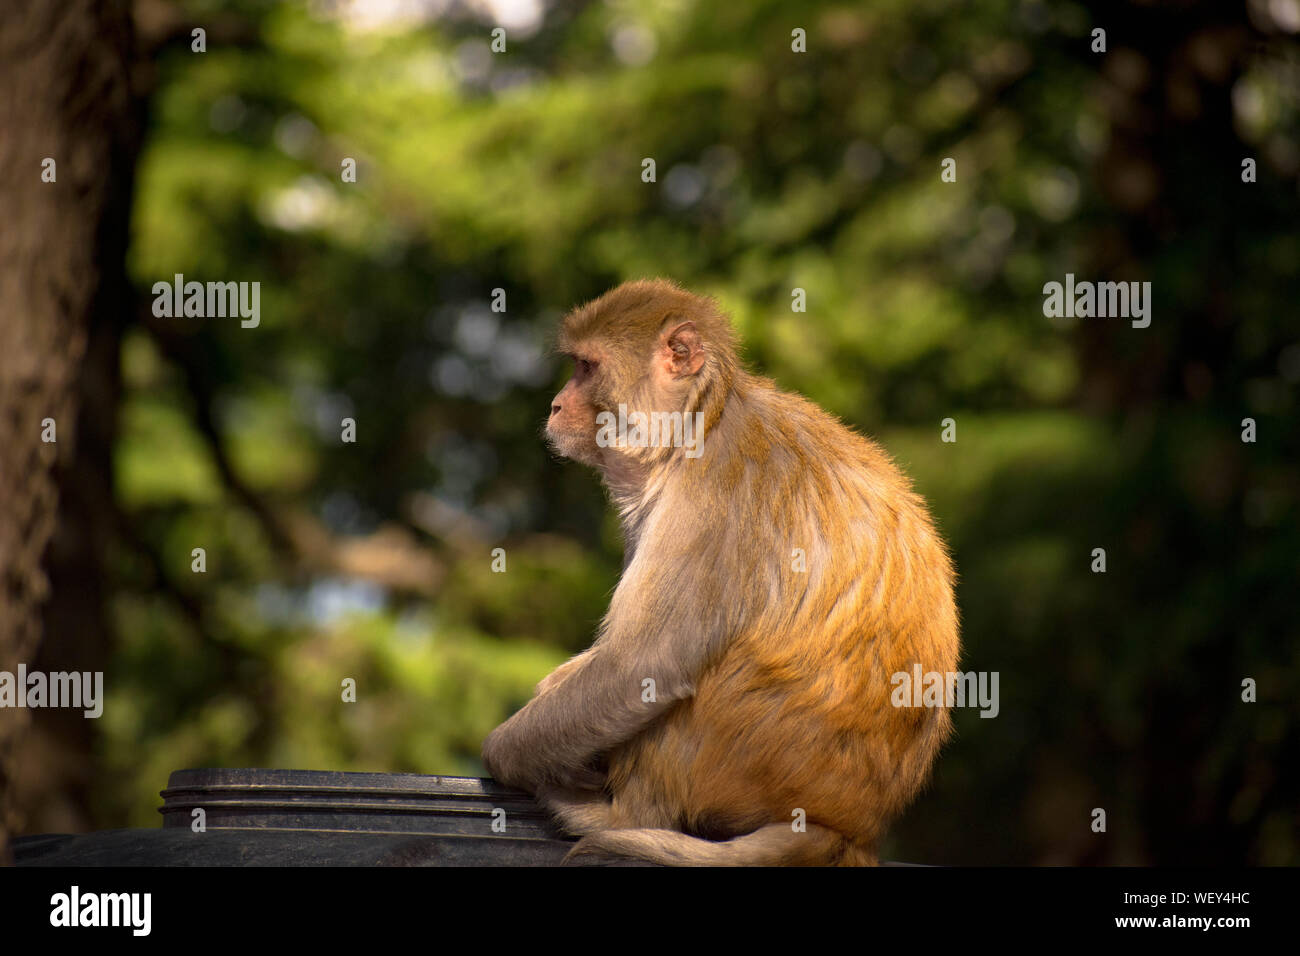 Monkey sitting on a branch of a tree or something which is its natural habitat. A natural background of thick forest is given around it. Stock Photo